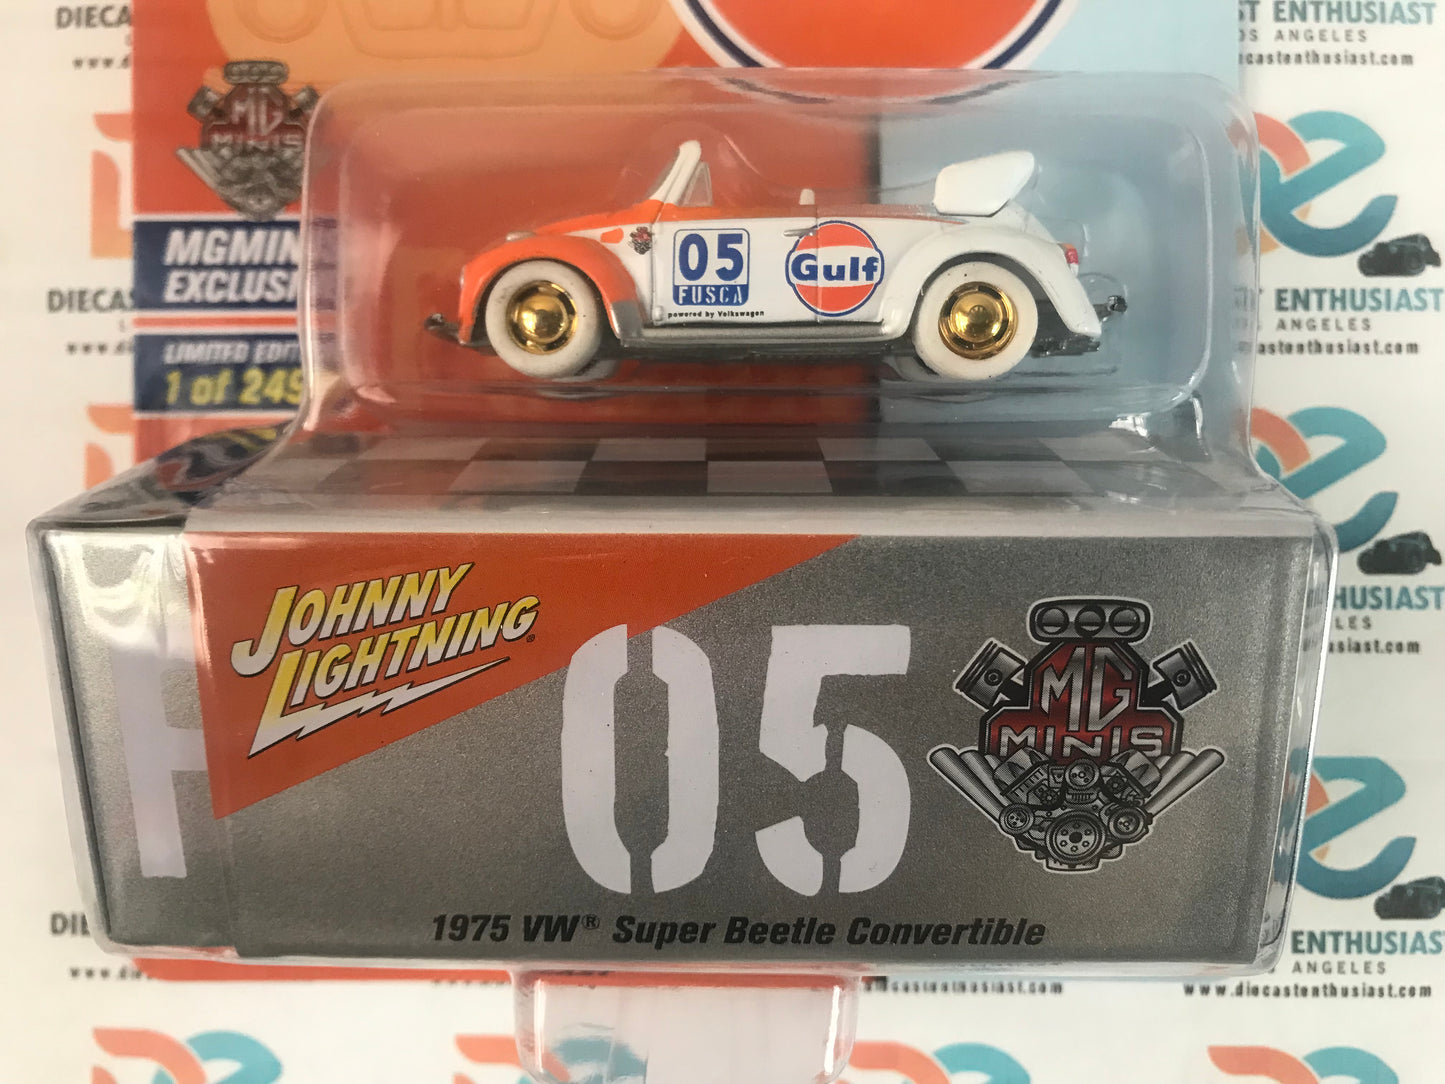 CHASE Johnny Lightning Exclusives Storage Tin Gulf 1975 VW Super Beetle Convertible 1:64